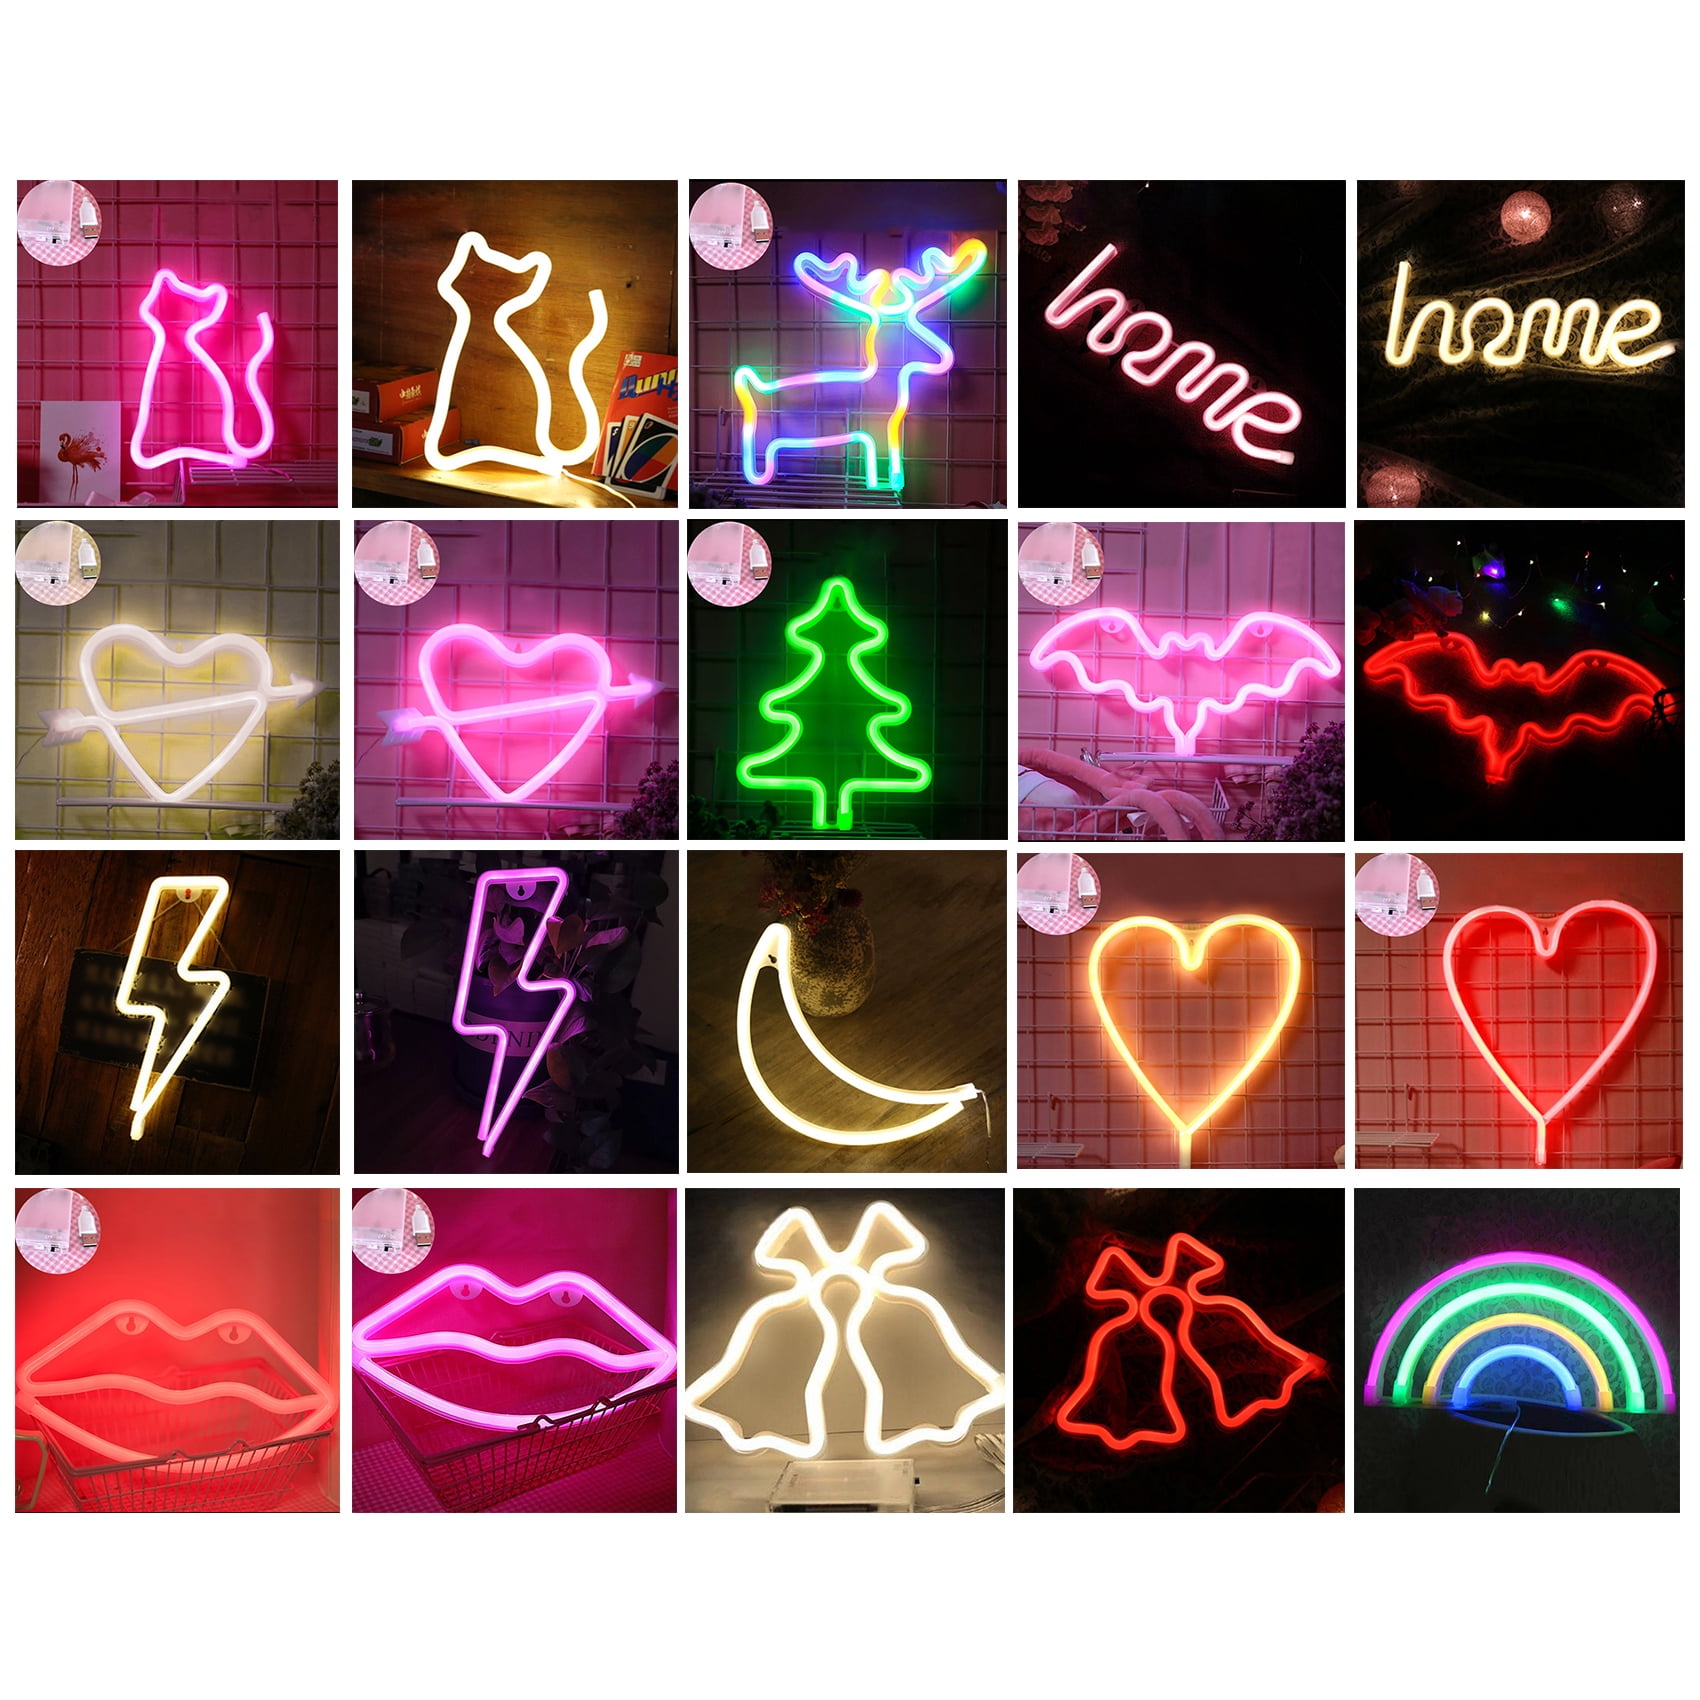 Details about   LED Neon Light Sign Large Size USB Wall Hanging Art Decorative for Kid's Room US 